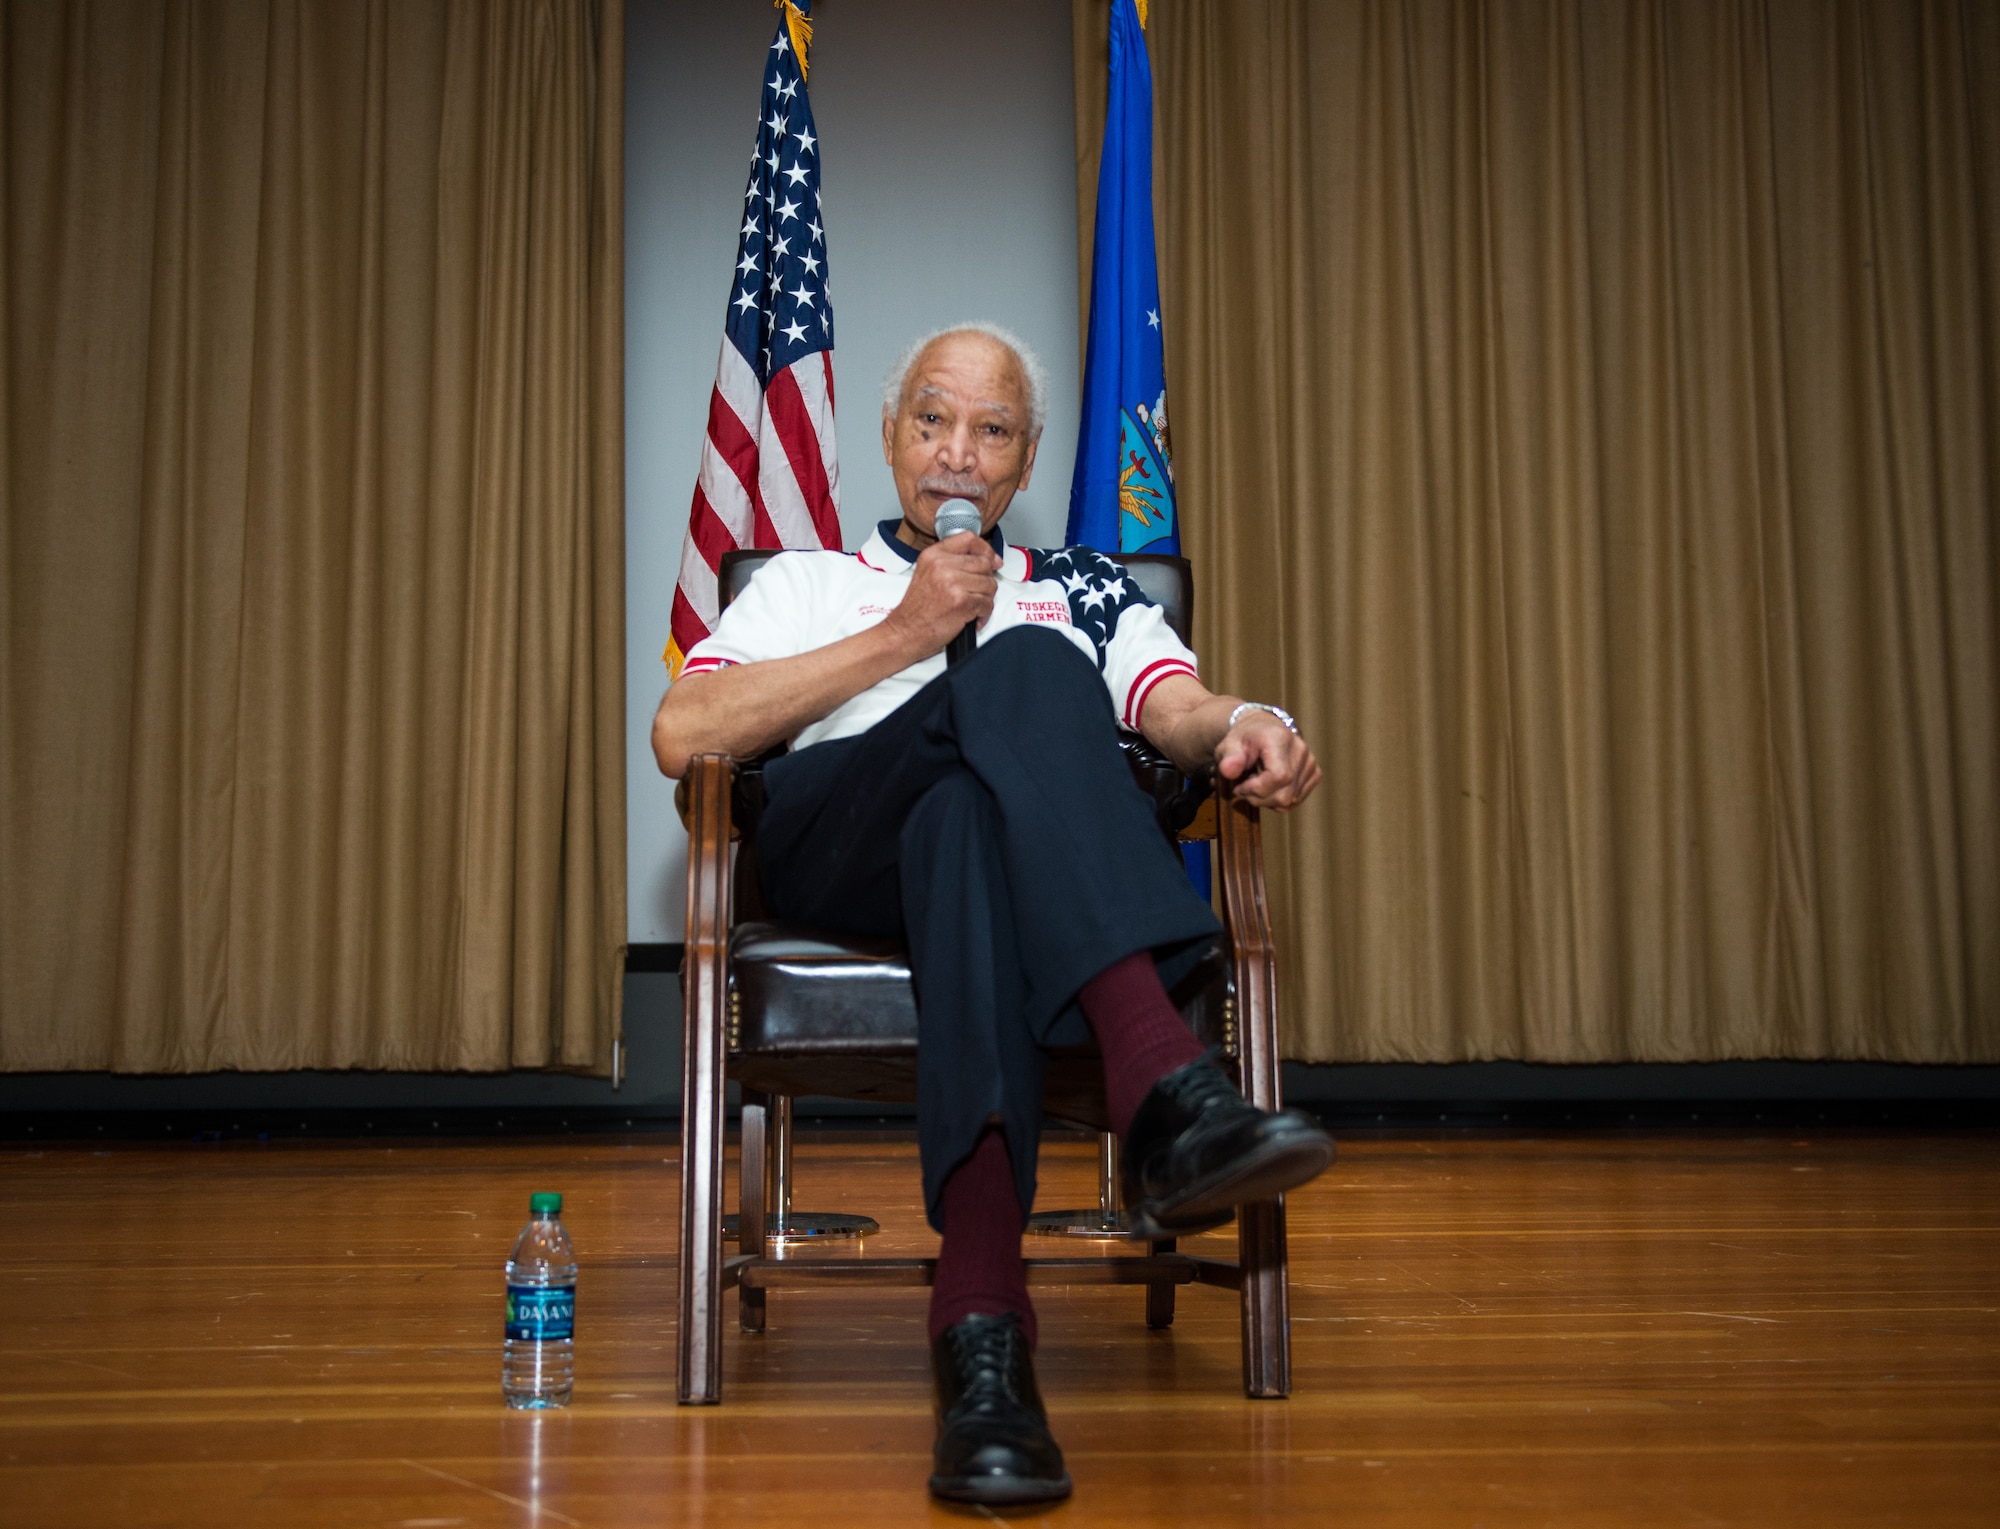 Retired Lt. Col. Robert Ashby, Tuskegee Airman, speaks to Thunderbolts during the 2018 Tuskegee Airmen Honor Event at Luke Air Force Base, Ariz., Feb. 15, 2018. During the event, Ashby spoke about the significant contributions and achievements made by the Tuskegee Airmen that helped shape aviation history. (U.S. Air Force photo/ Airman 1st Class Alexander Cook)